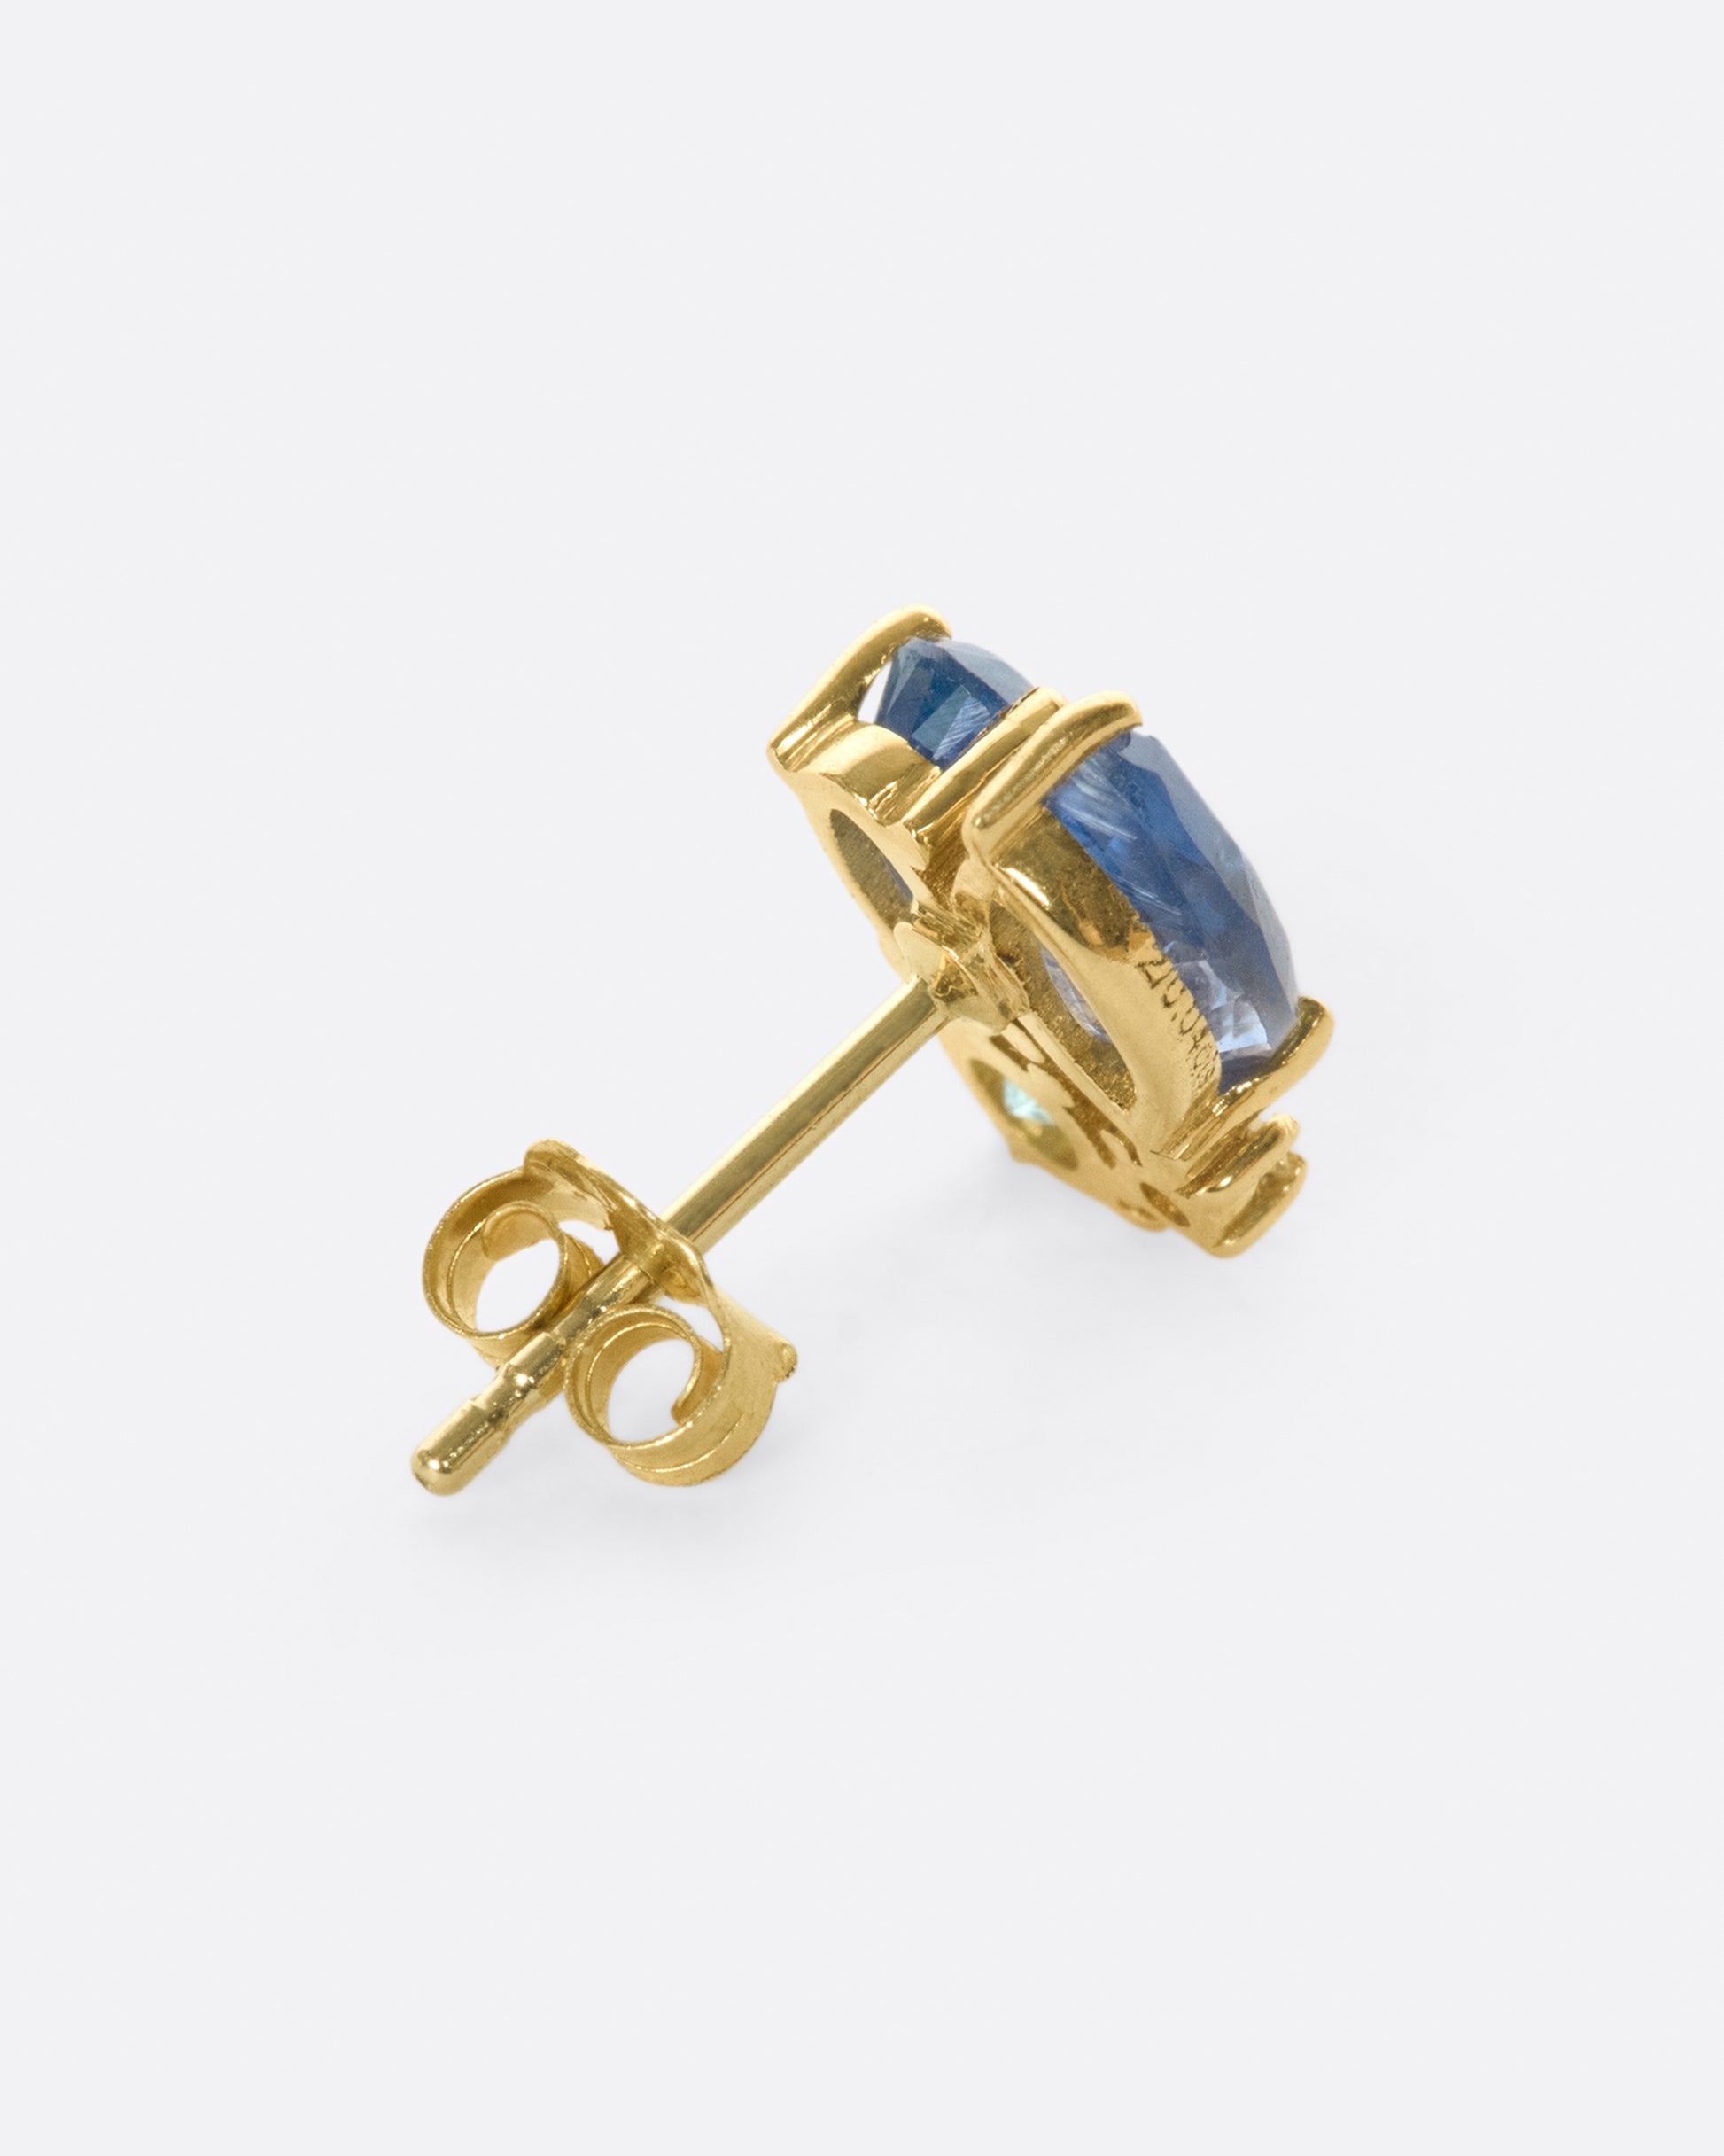 One of Eva Noga's beloved cluster studs, this time in shade of blue.